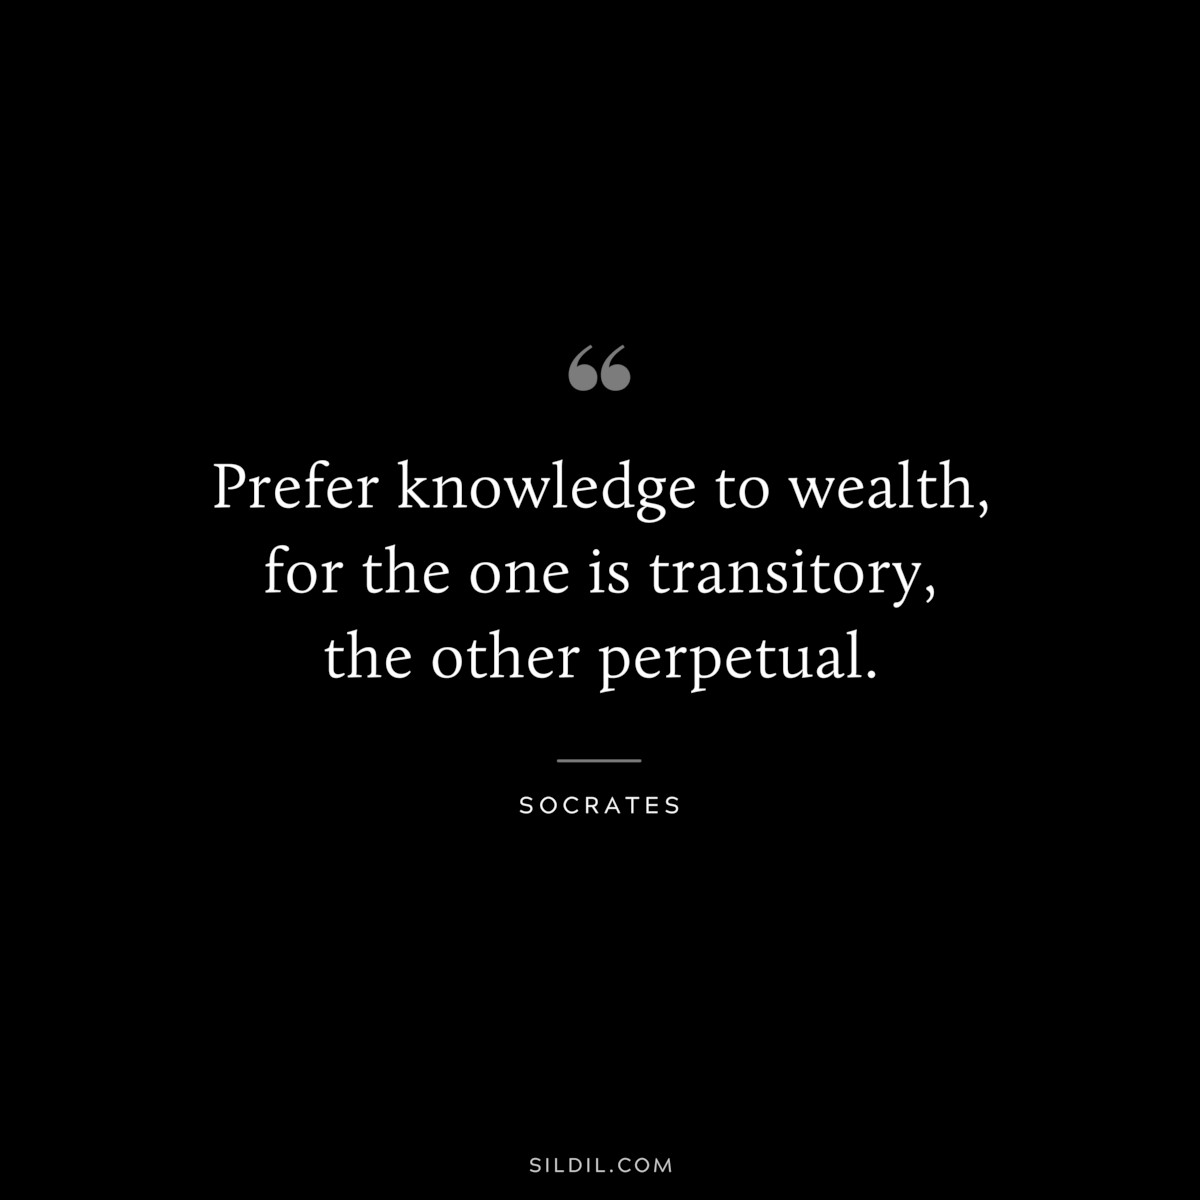 Prefer knowledge to wealth, for the one is transitory, the other perpetual. ― Socrates